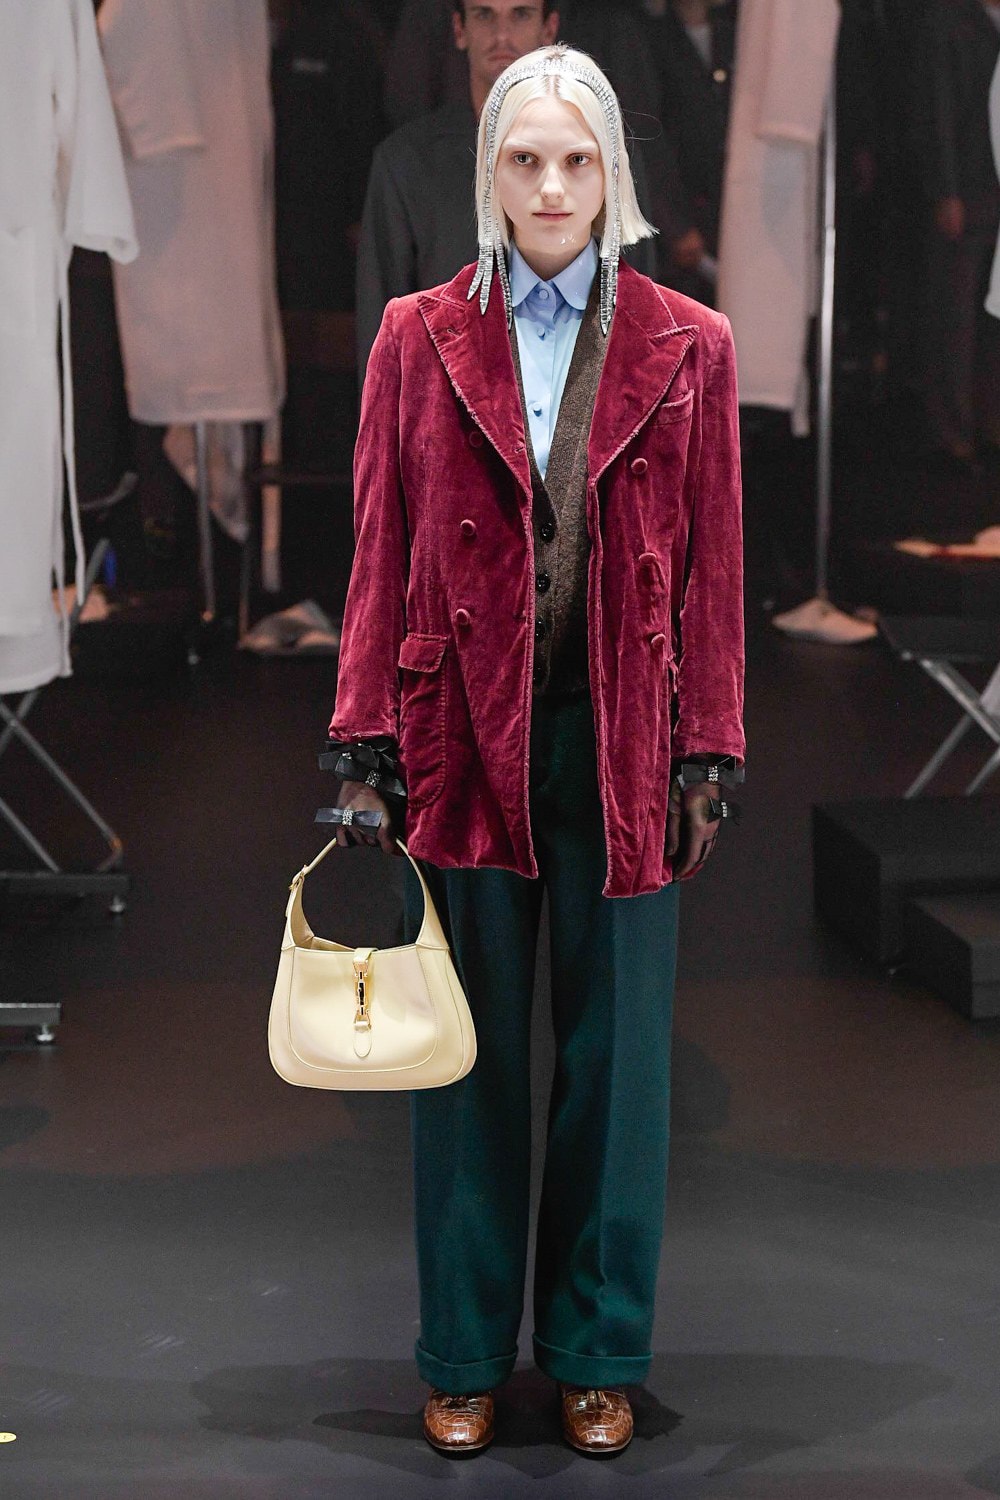 Gucci Fall/Winter 2020 Collection Runway Show Jacket Velvet Burgundy